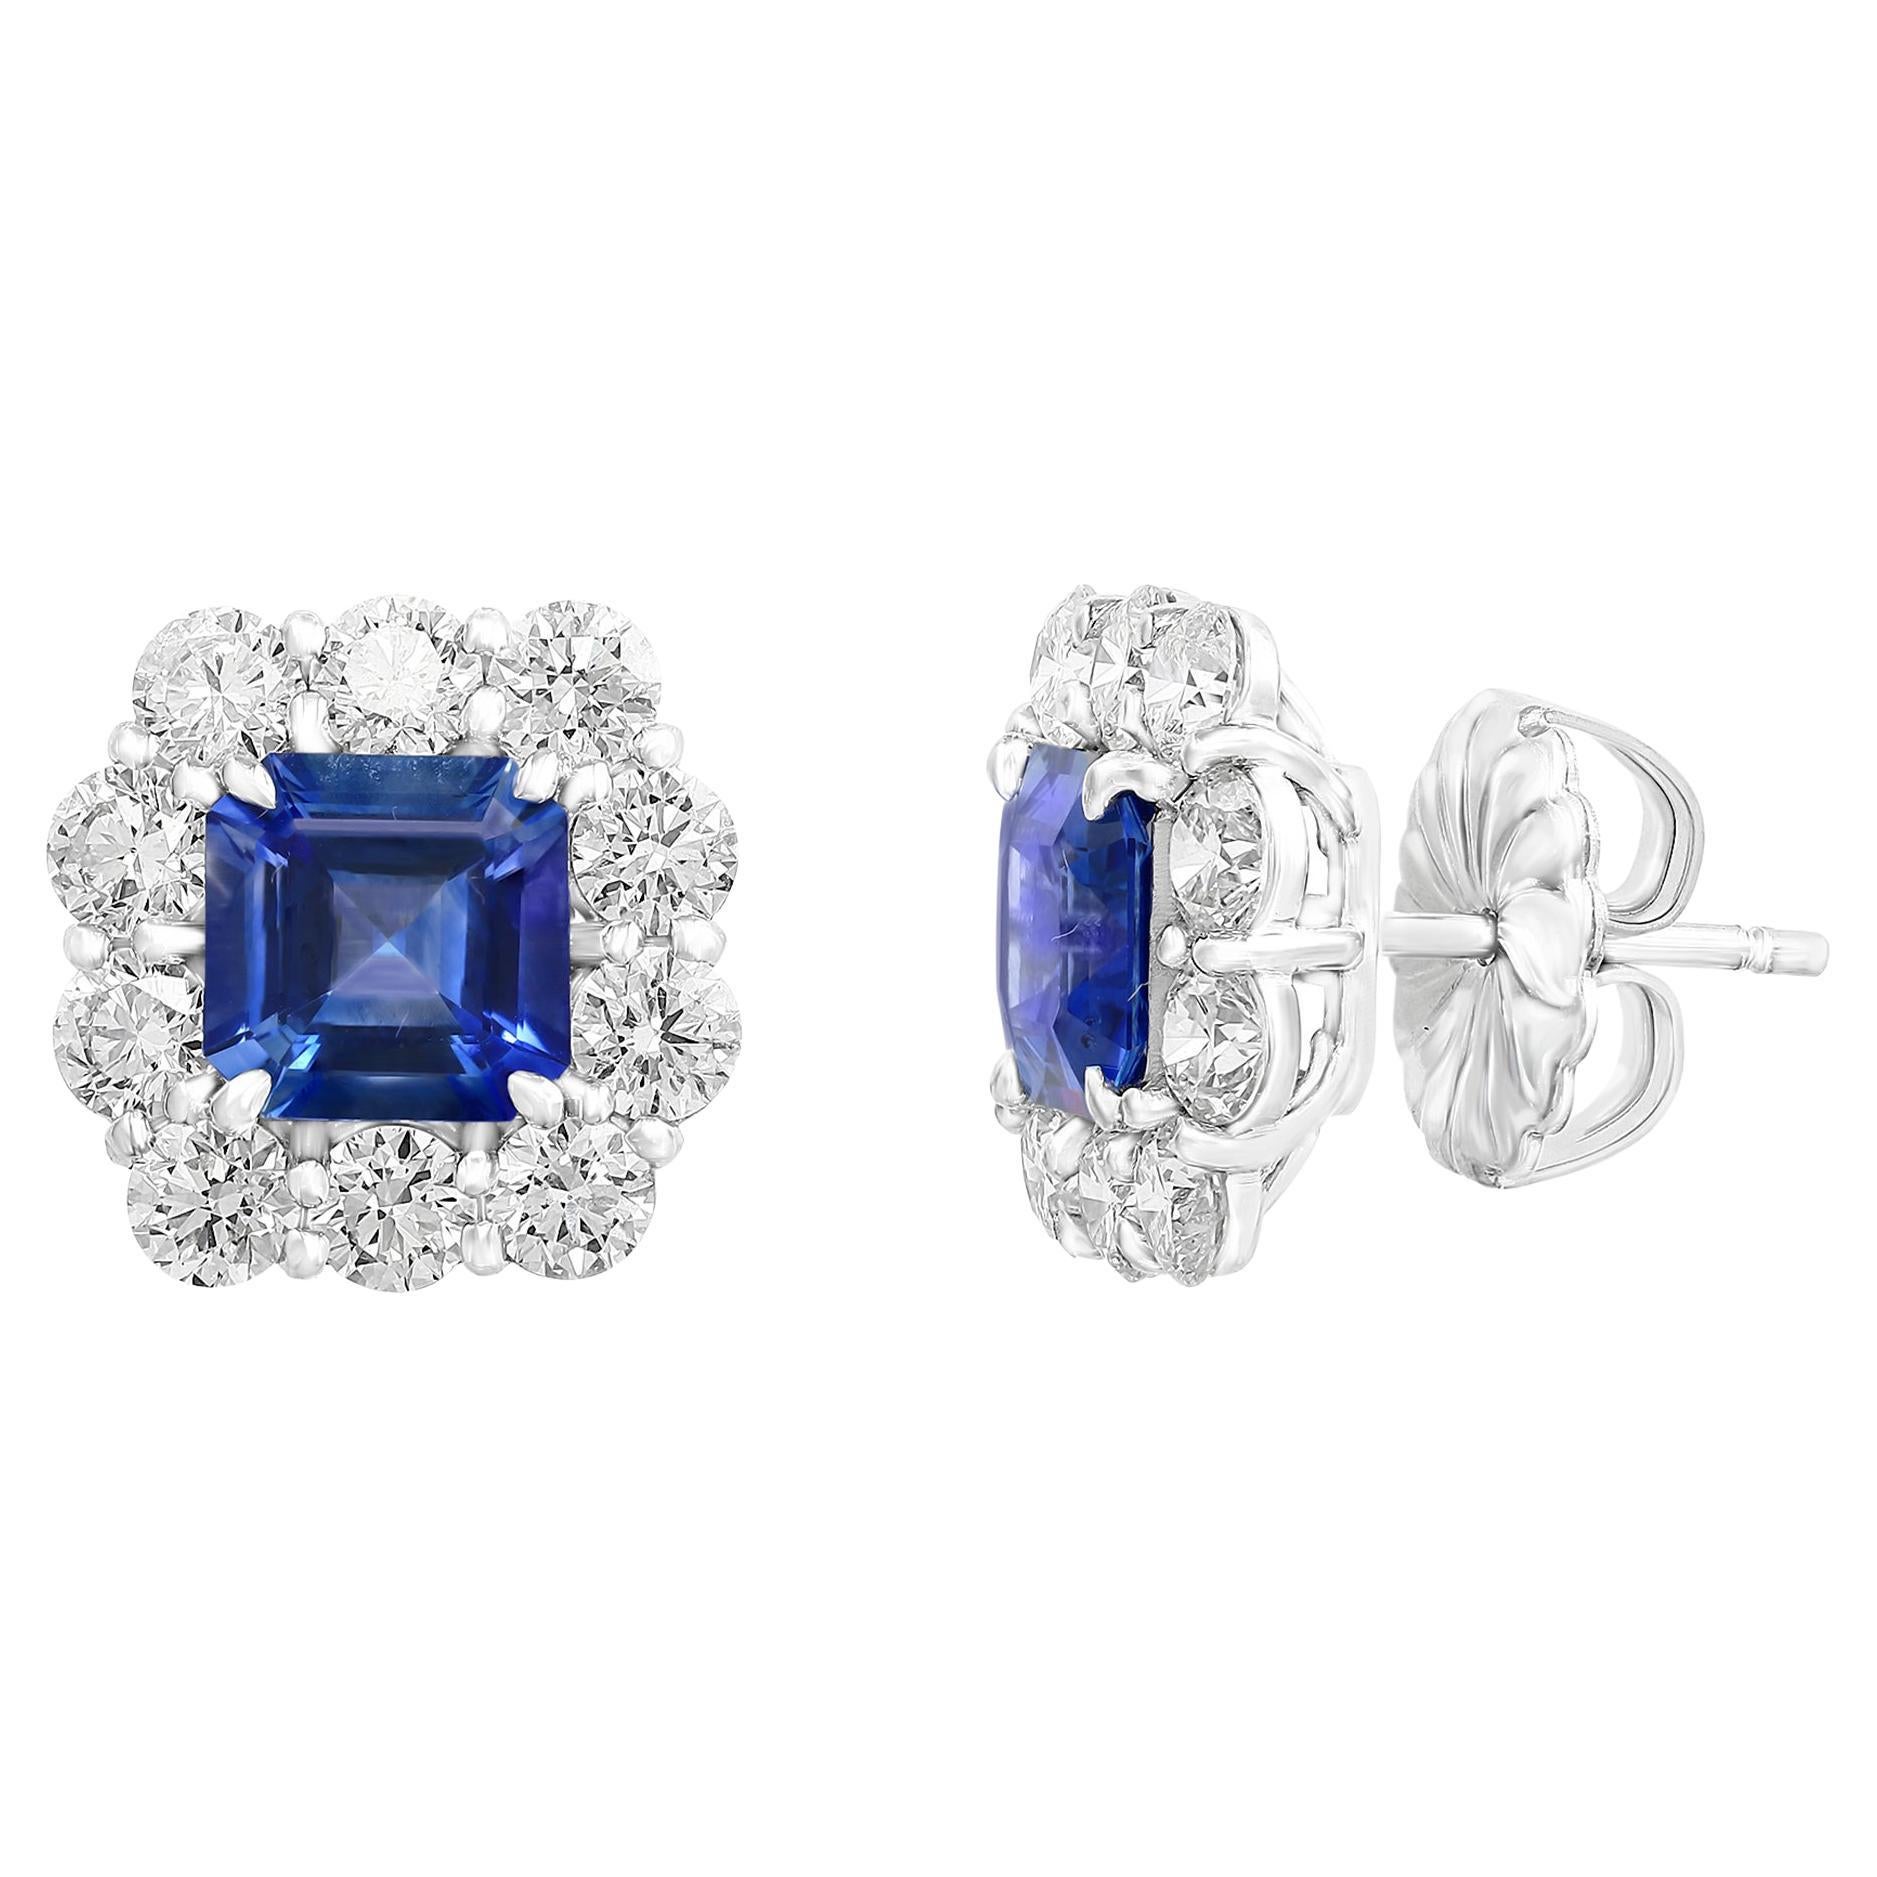 3.20 Carat Emerald Cut Blue Sapphire and Diamond Stud Earrings in 18K White Gold For Sale